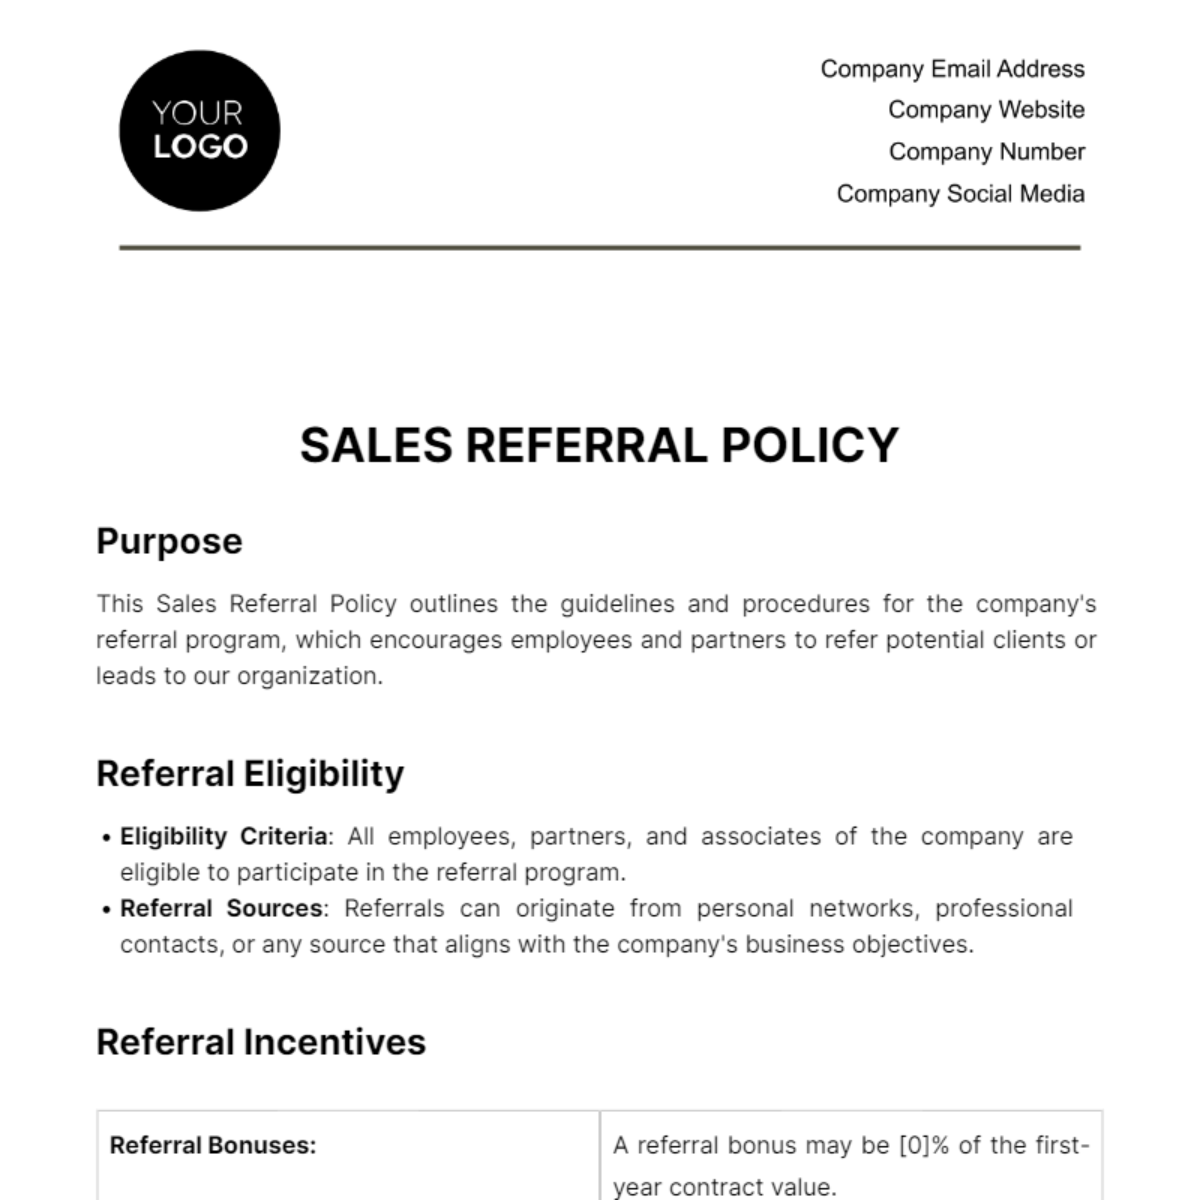 Sales Referral Policy Template